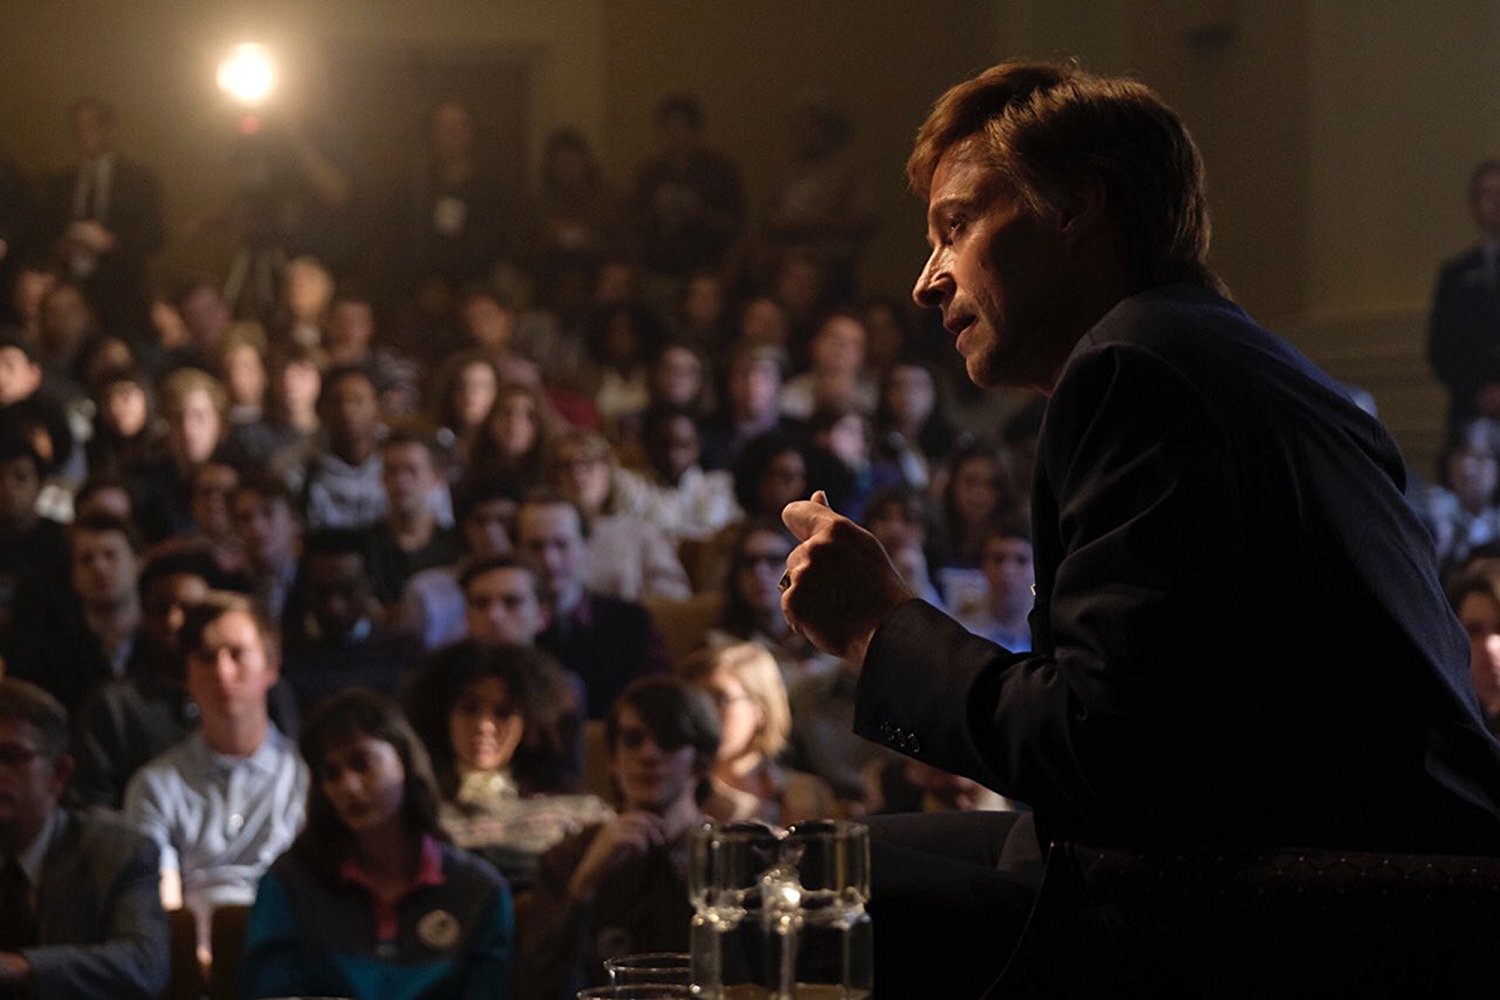 The Front Runner, Movie reviews, Lucas Mirabella